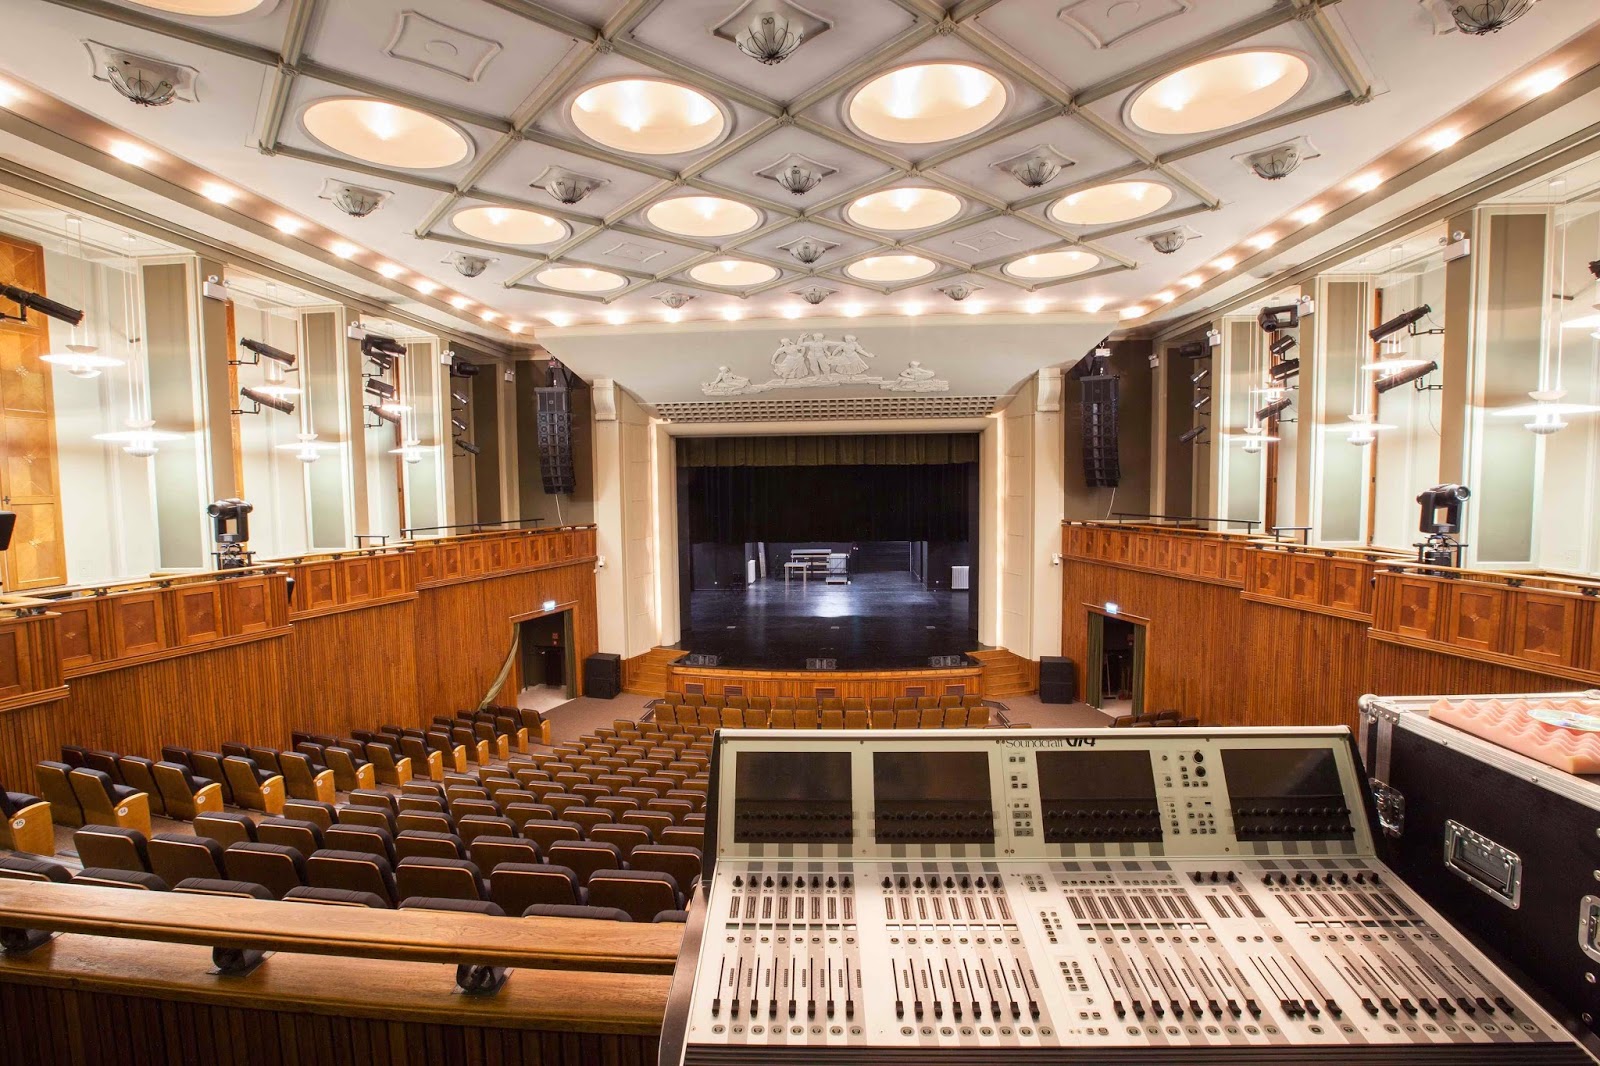 Katowice’s Palace of Youth Finds New Life with HARMAN’s AKG Microphones, JBL Loudspeakers and Soundcraft Consoles